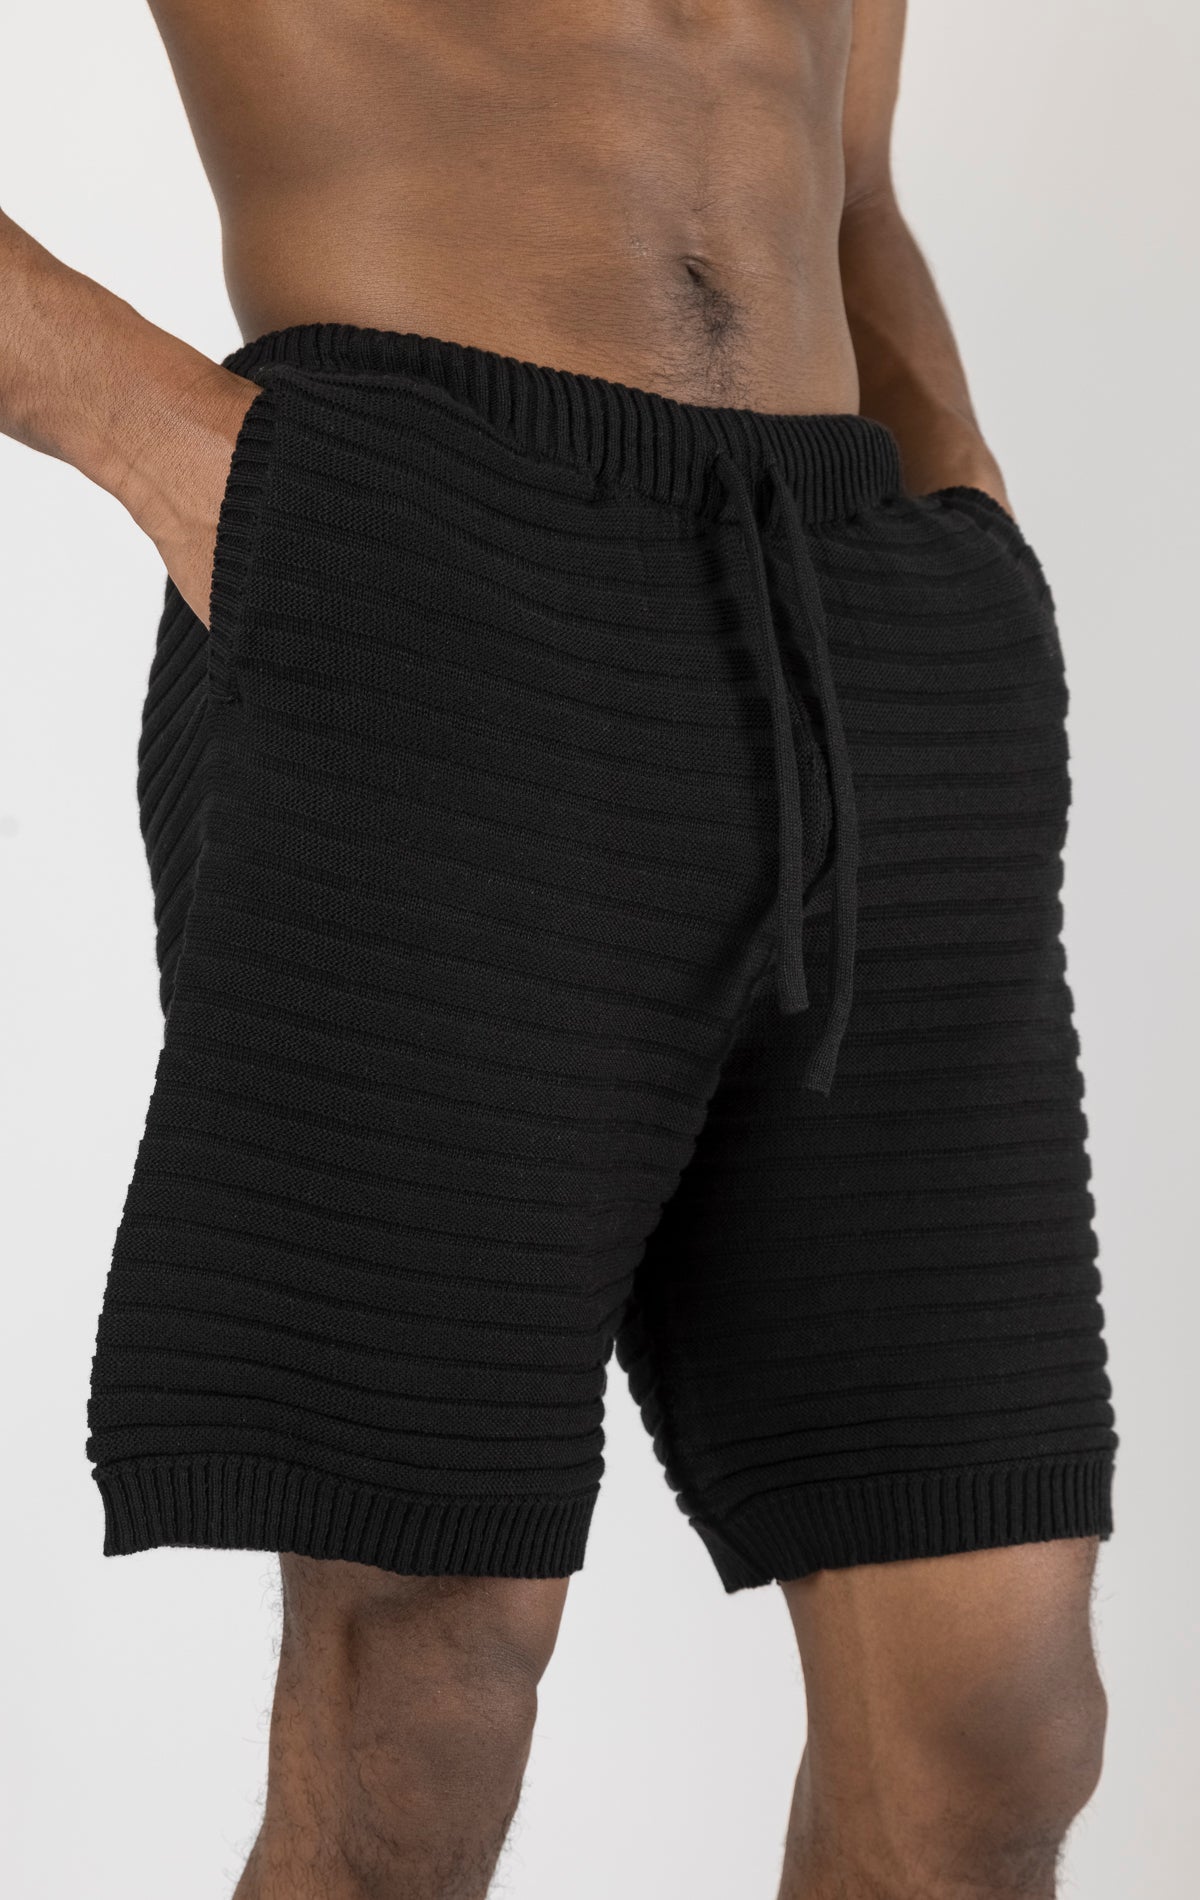 Men's black eyelet short sleeve knit top and shorts set in a variety of colors. The set is made from a soft and breathable knit fabric (50% viscose, 50% polyamide) and features a relaxed-fit top with eyelet detailing on the short sleeves and comfortable shorts with an elastic waistband.